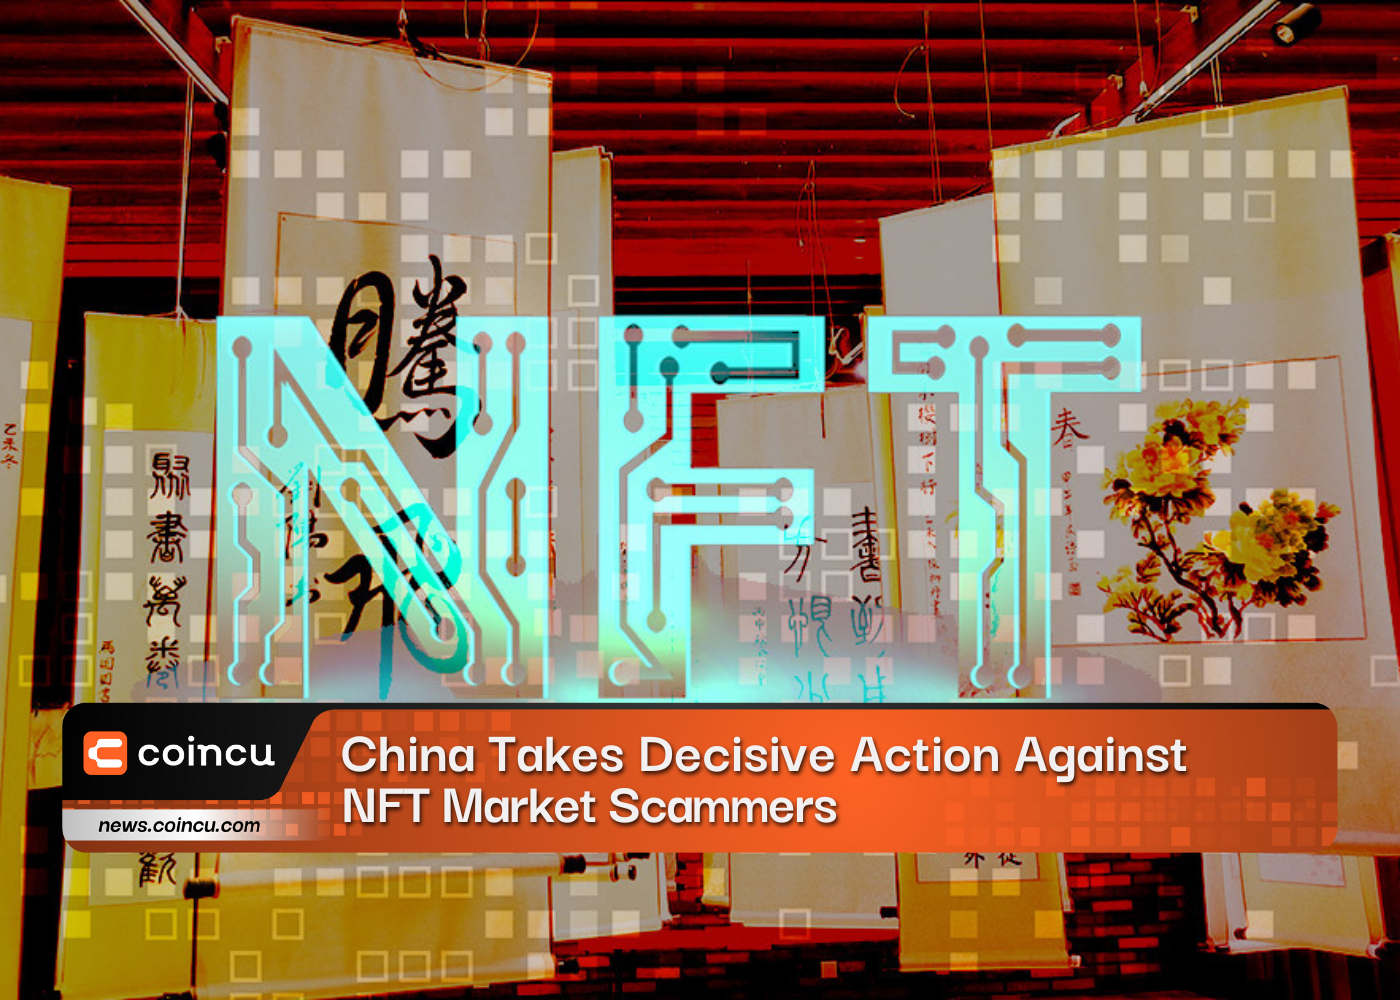 China Takes Decisive Action Against